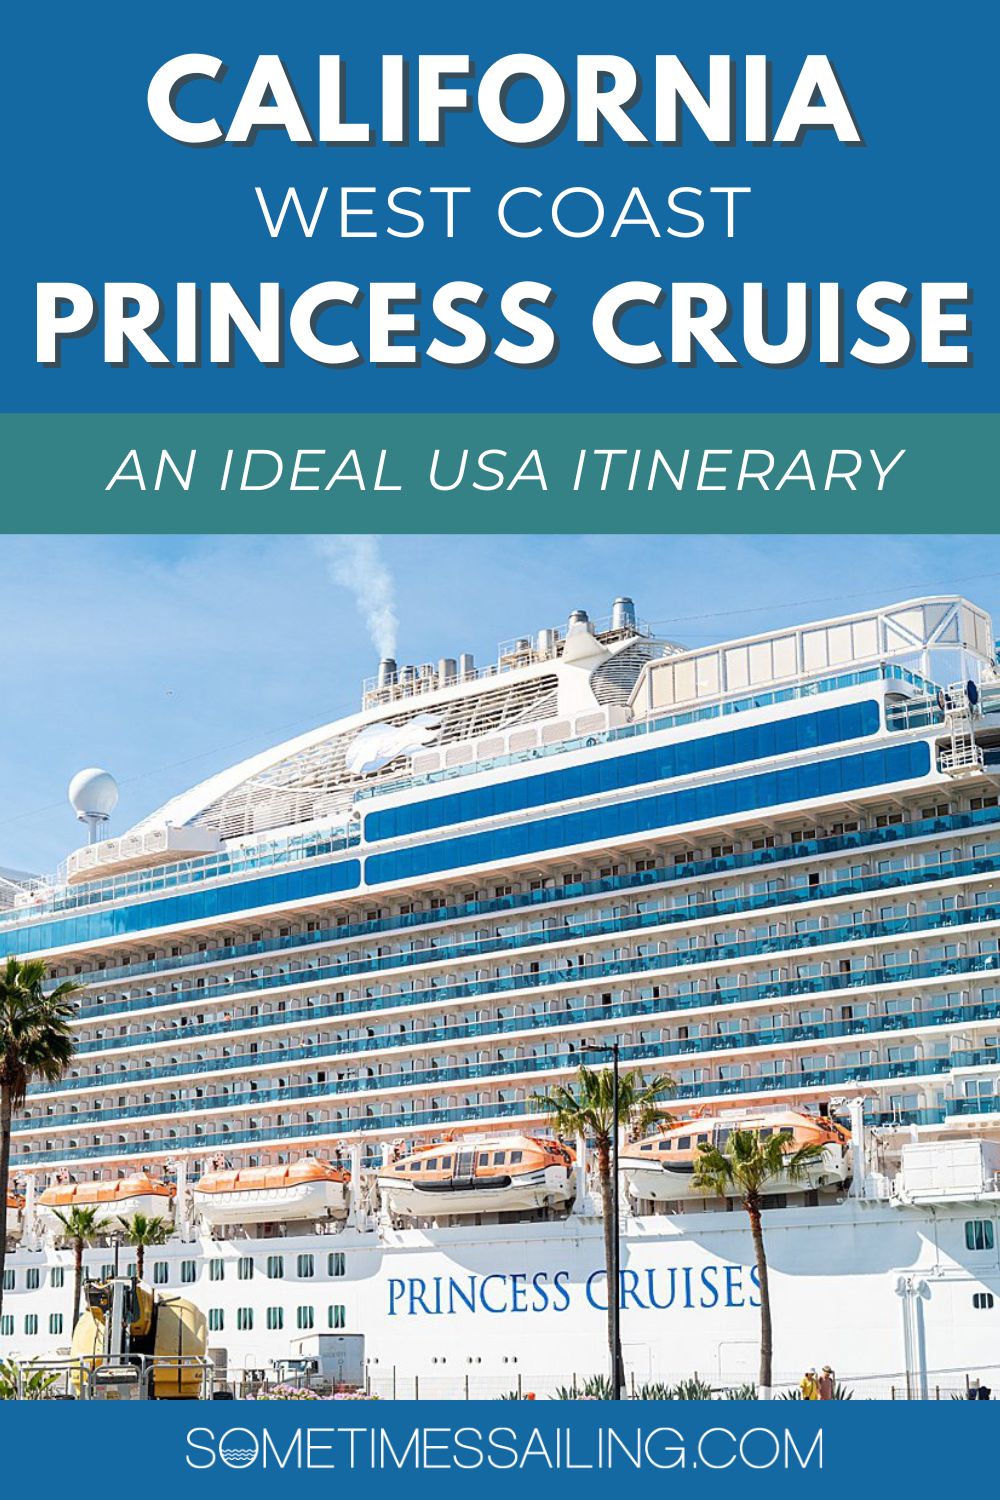 California West Coast Princess Cruise: An Ideal USA Itinerary, with a picture of the Majestic Princess cruise ship.